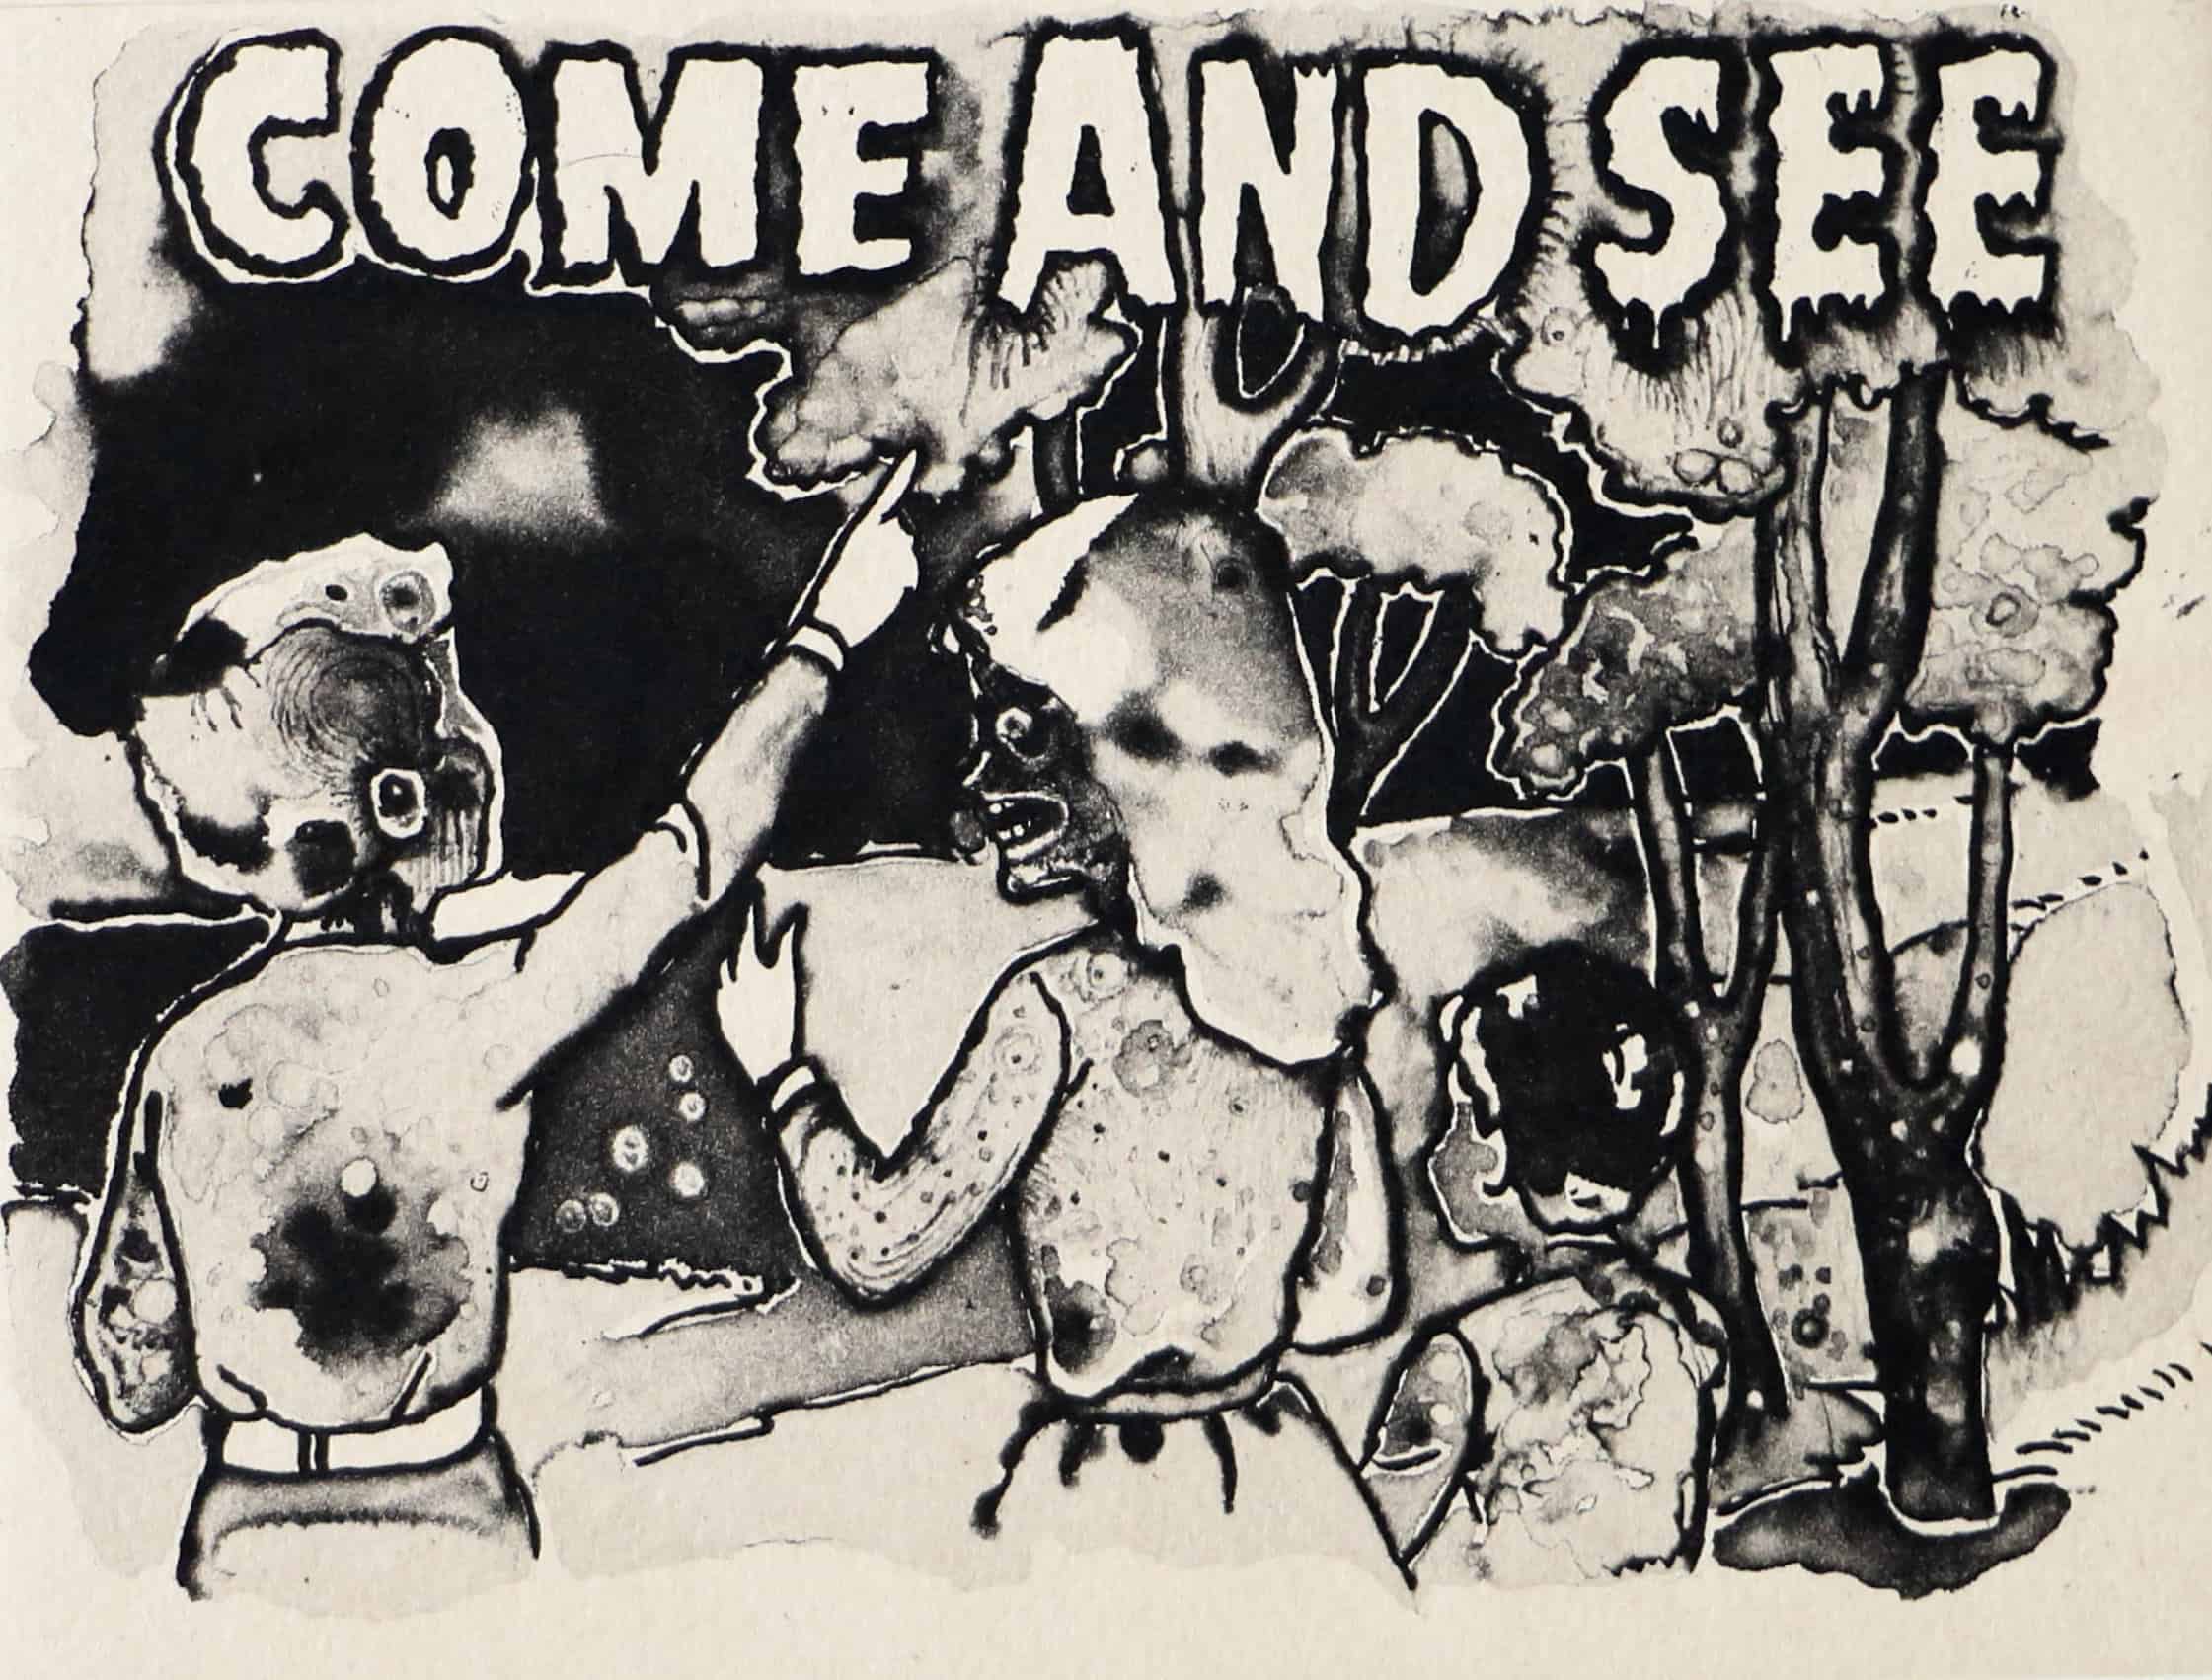 Jake & Dinos Chapman "Come and See," etching. 2013. Image © by Nonsuch Editions.